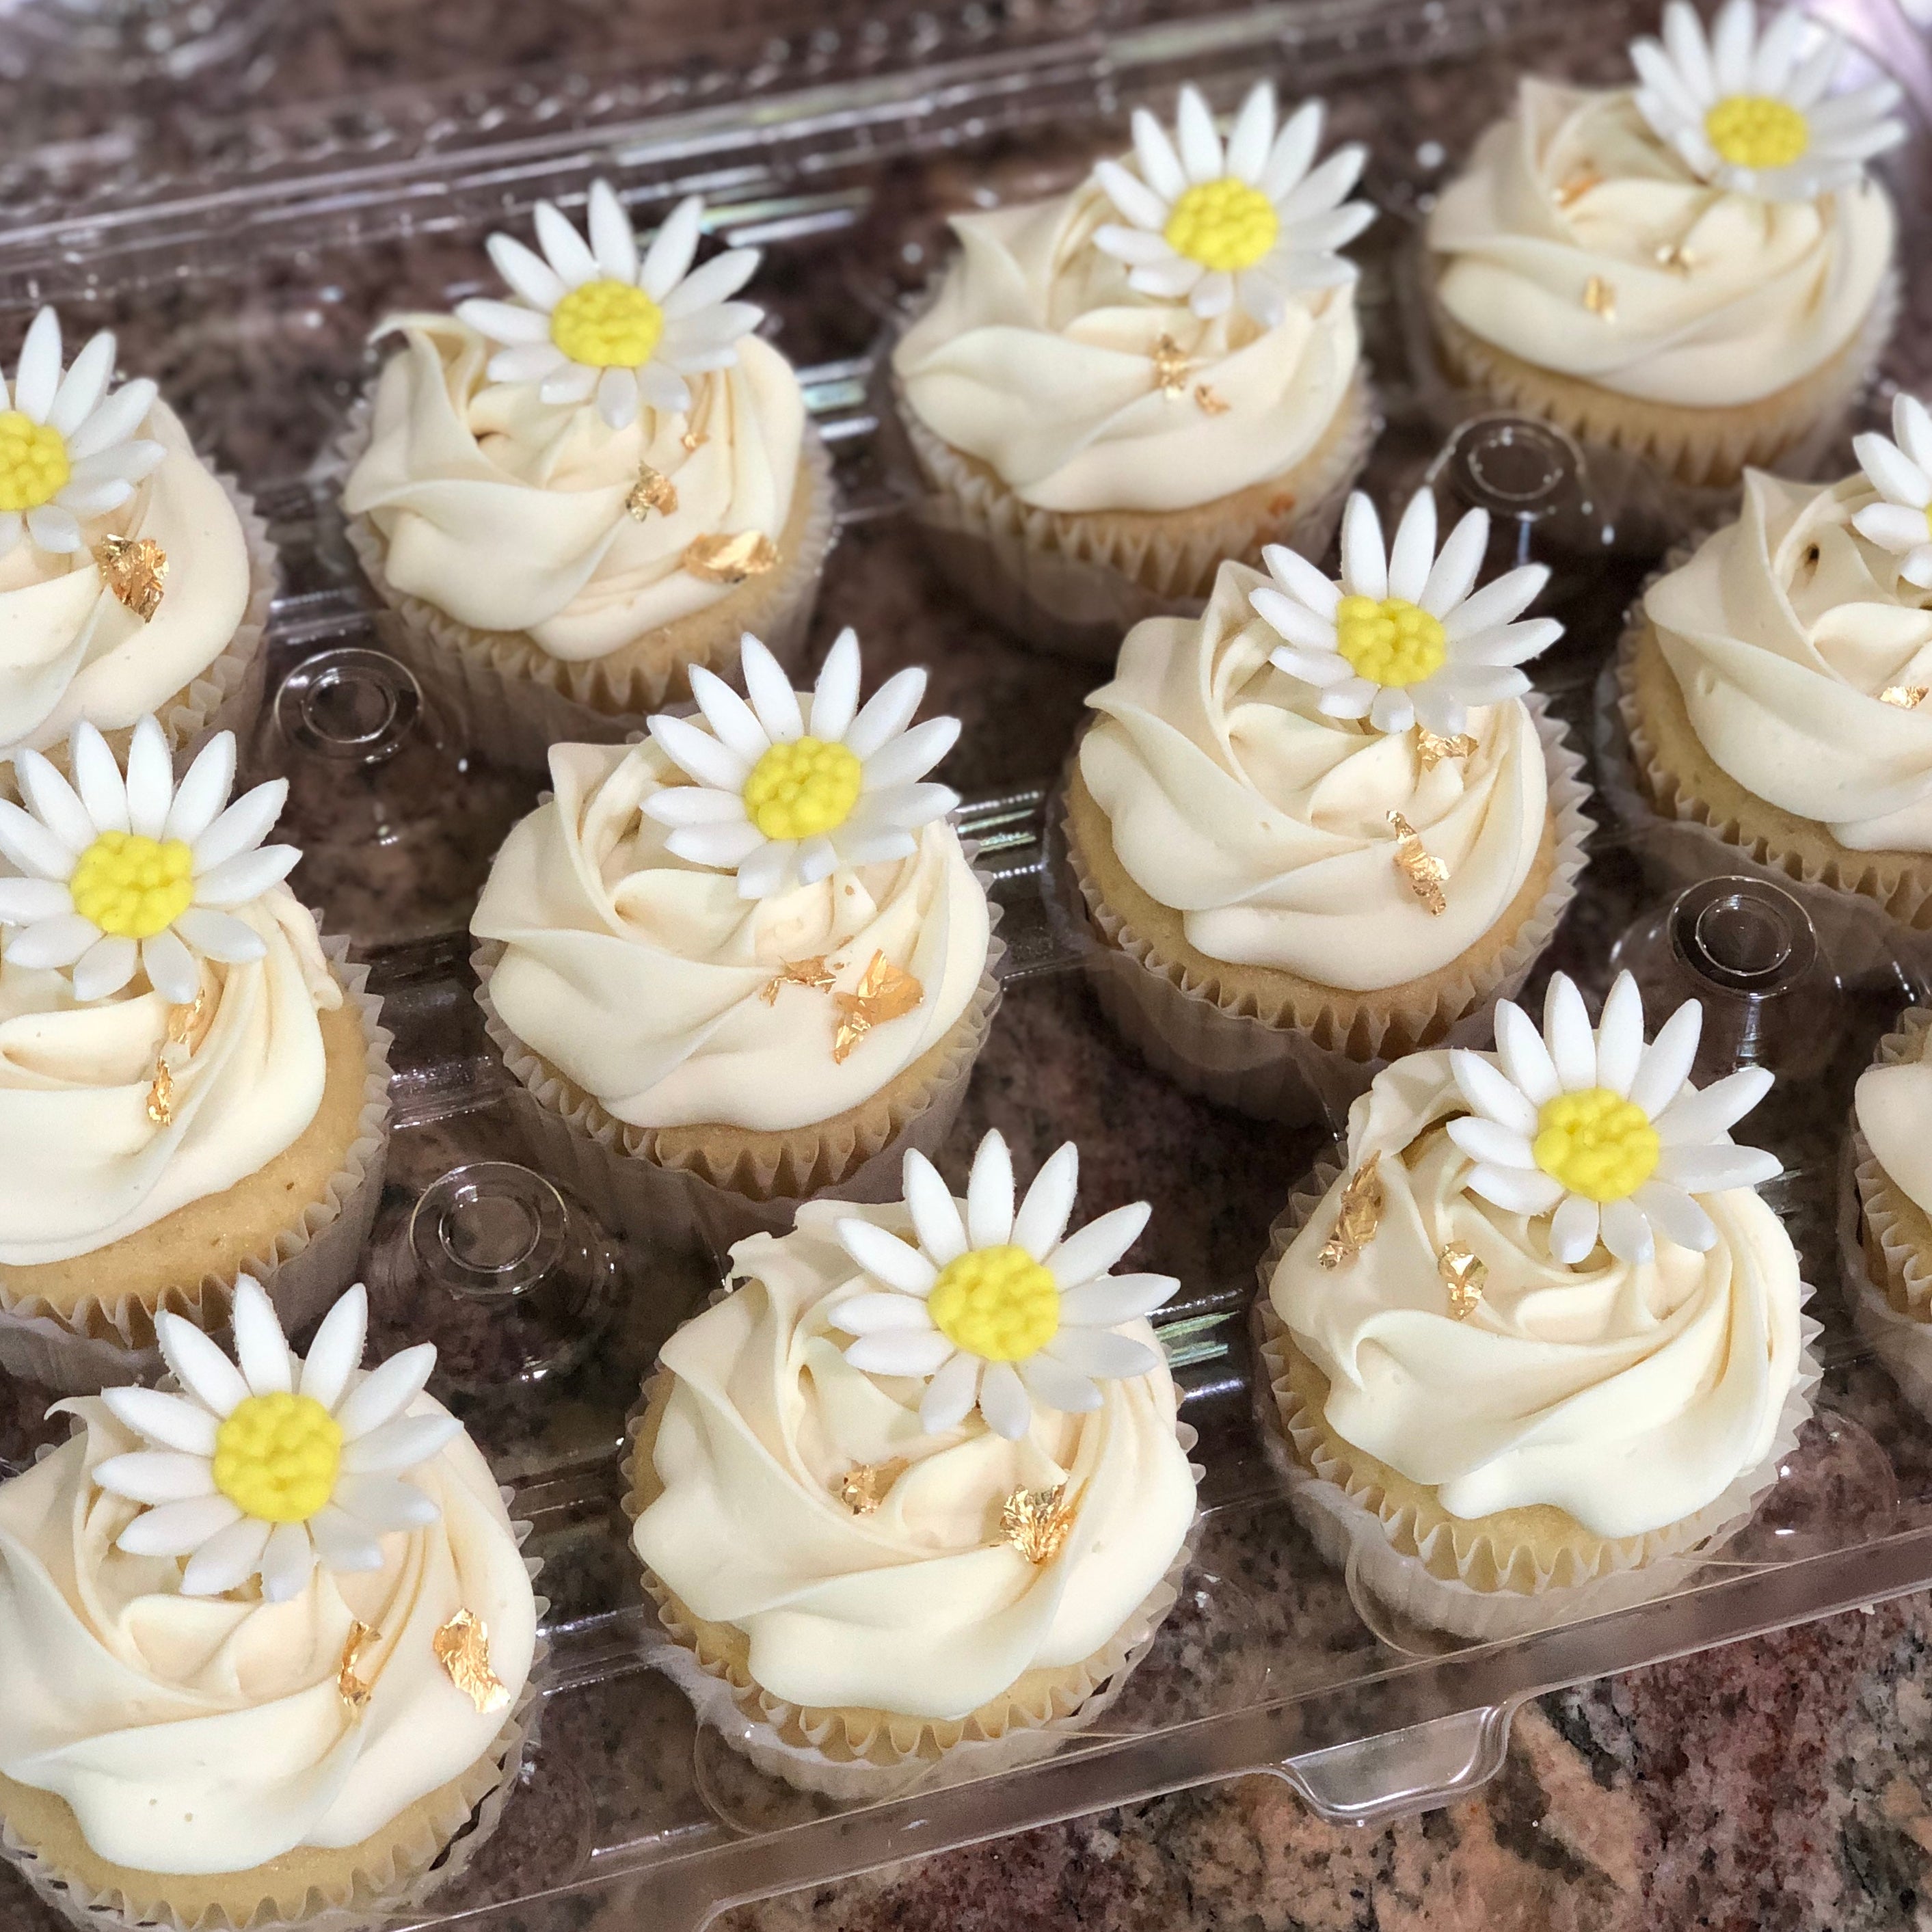 Mums Rose Design Cupcakes - Gift Box of 9 | Mothers Day Gifts